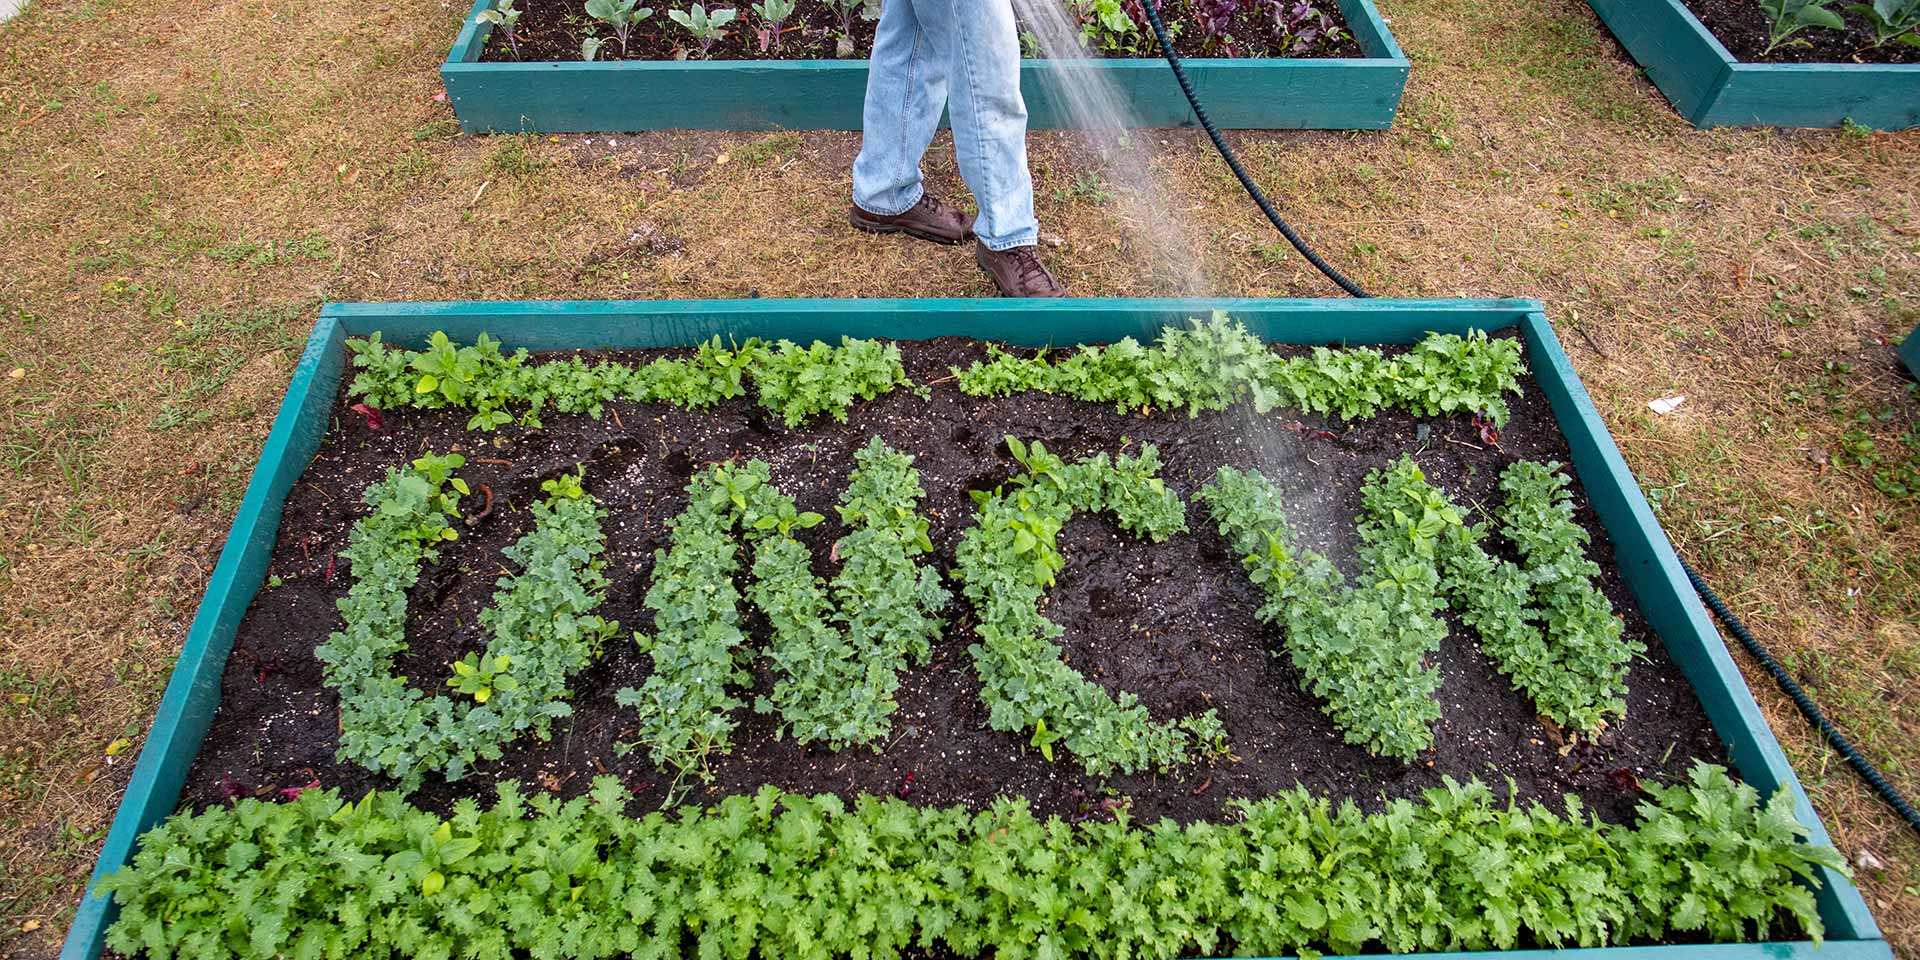 a person off campus watering plants in the shape of “UNCW”